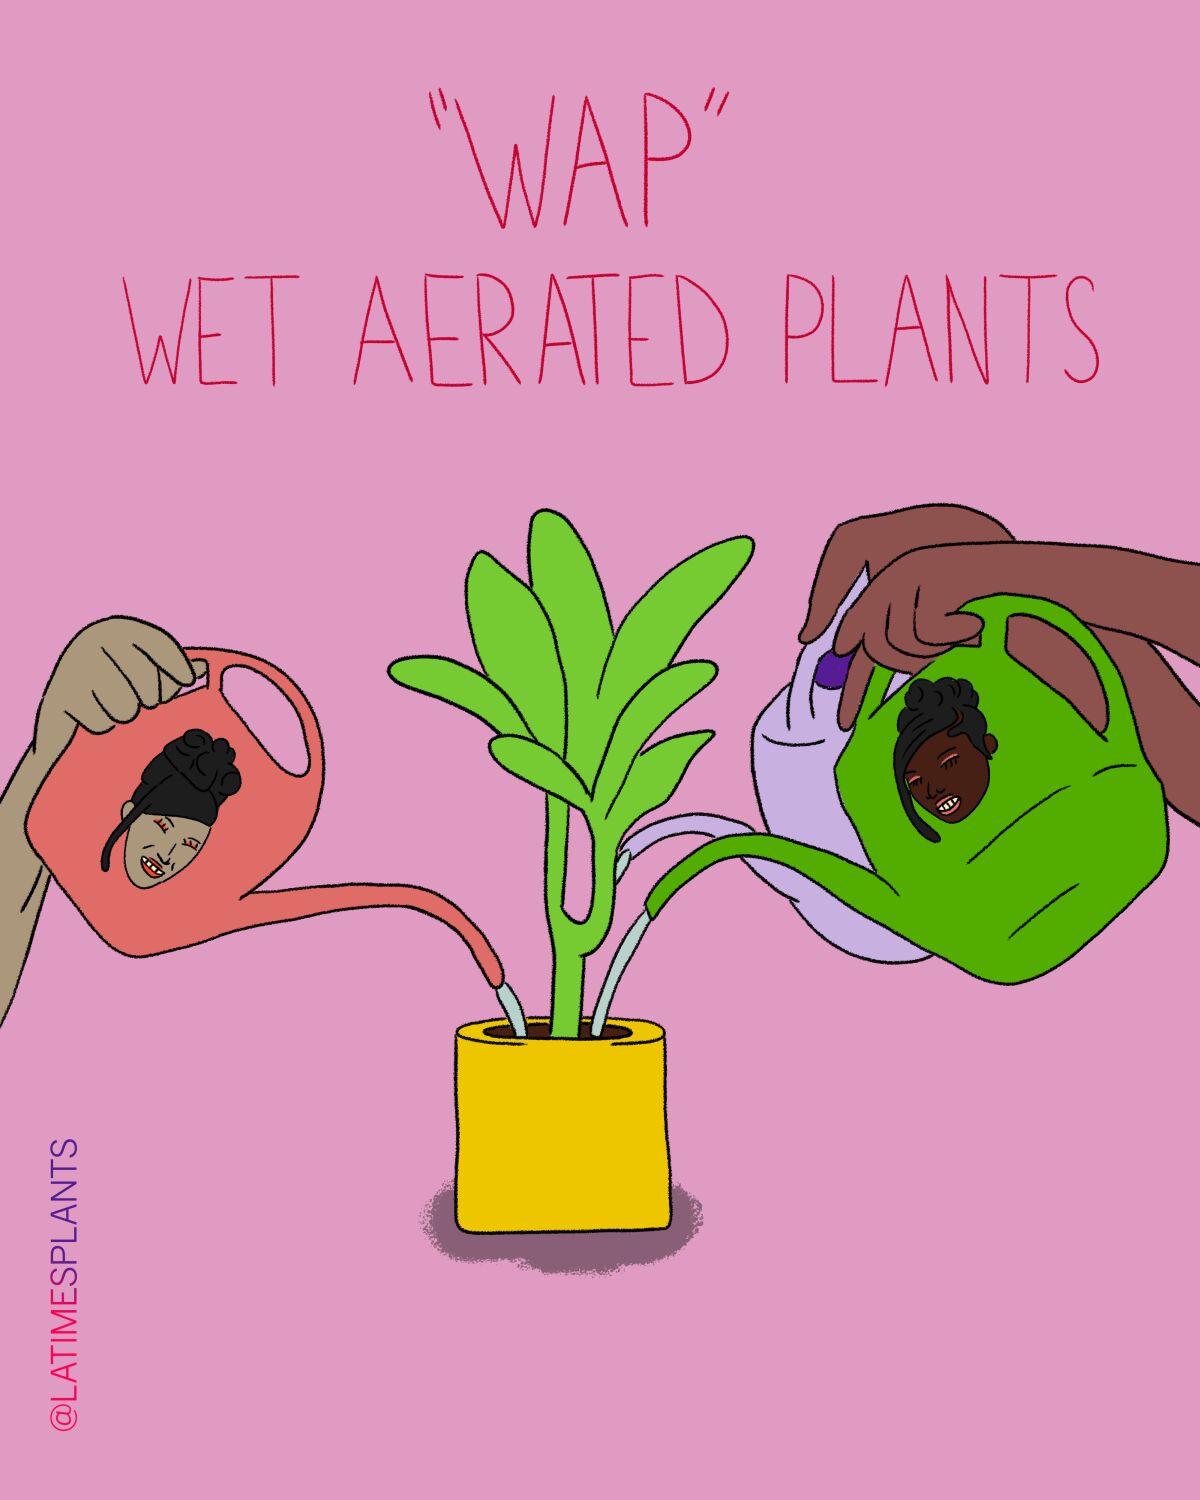 Wet aerated plants